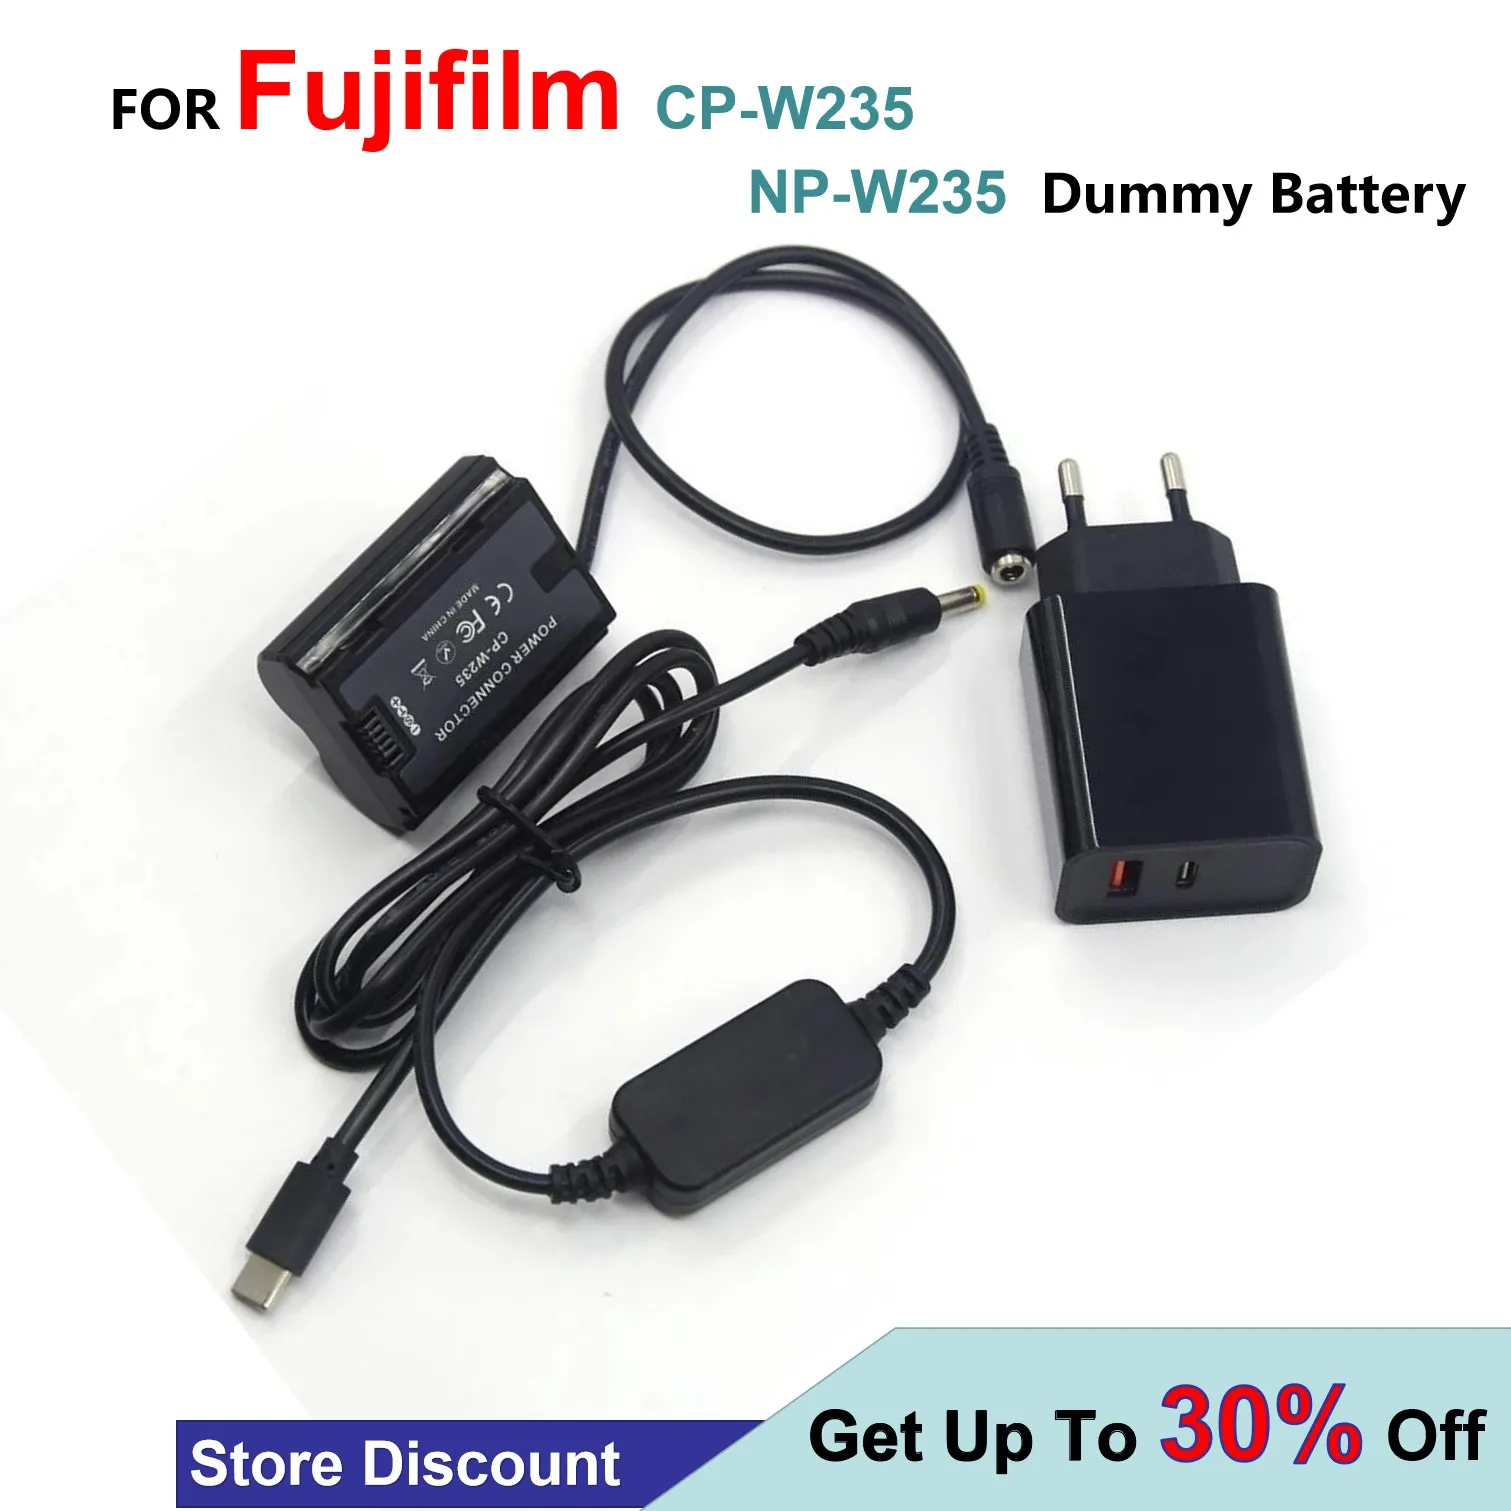 

CP-W235 Dummy Battery + USB Type-C Charger Cable + PD Charger For Fujifilm X-T4 XT4 Digital CamerasT10 X-T2 X-A1 HS33 HS50 EXR